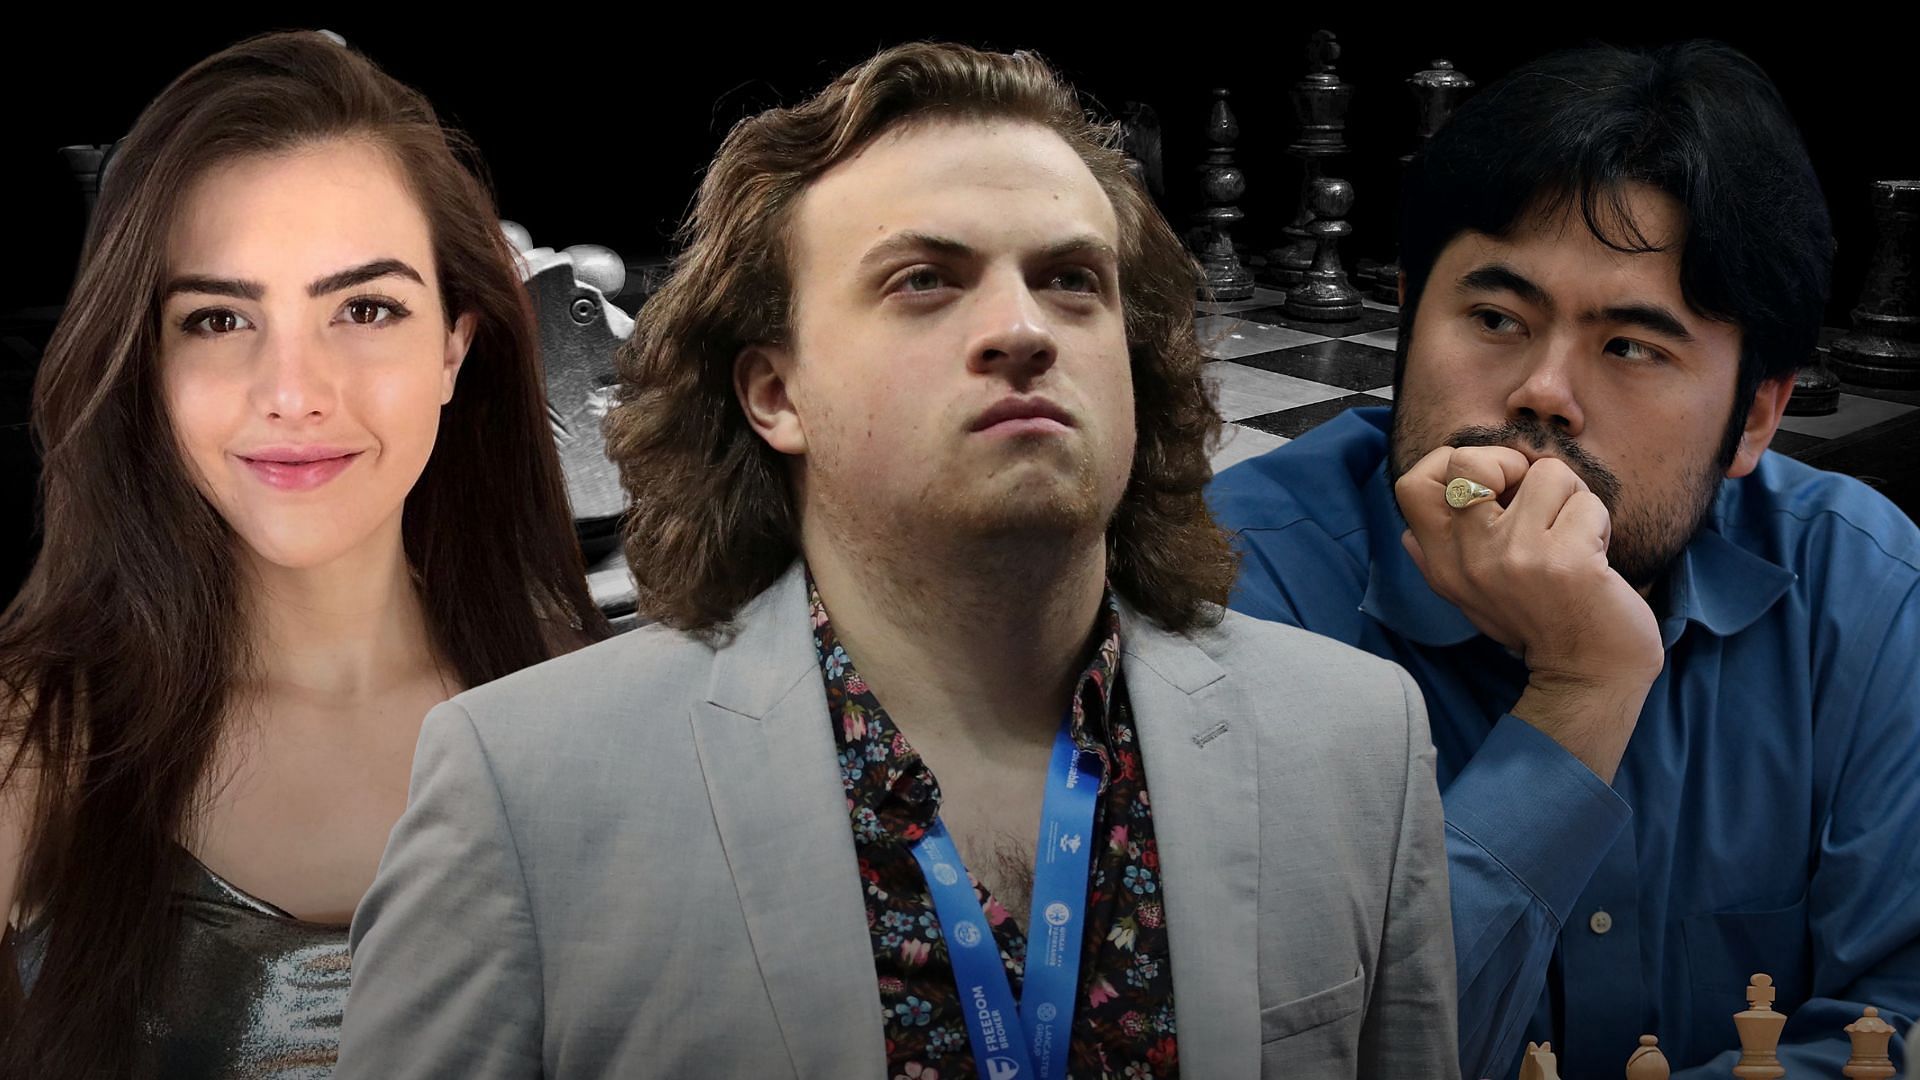 Play Chess With Streamers, Top Players, Personalities 